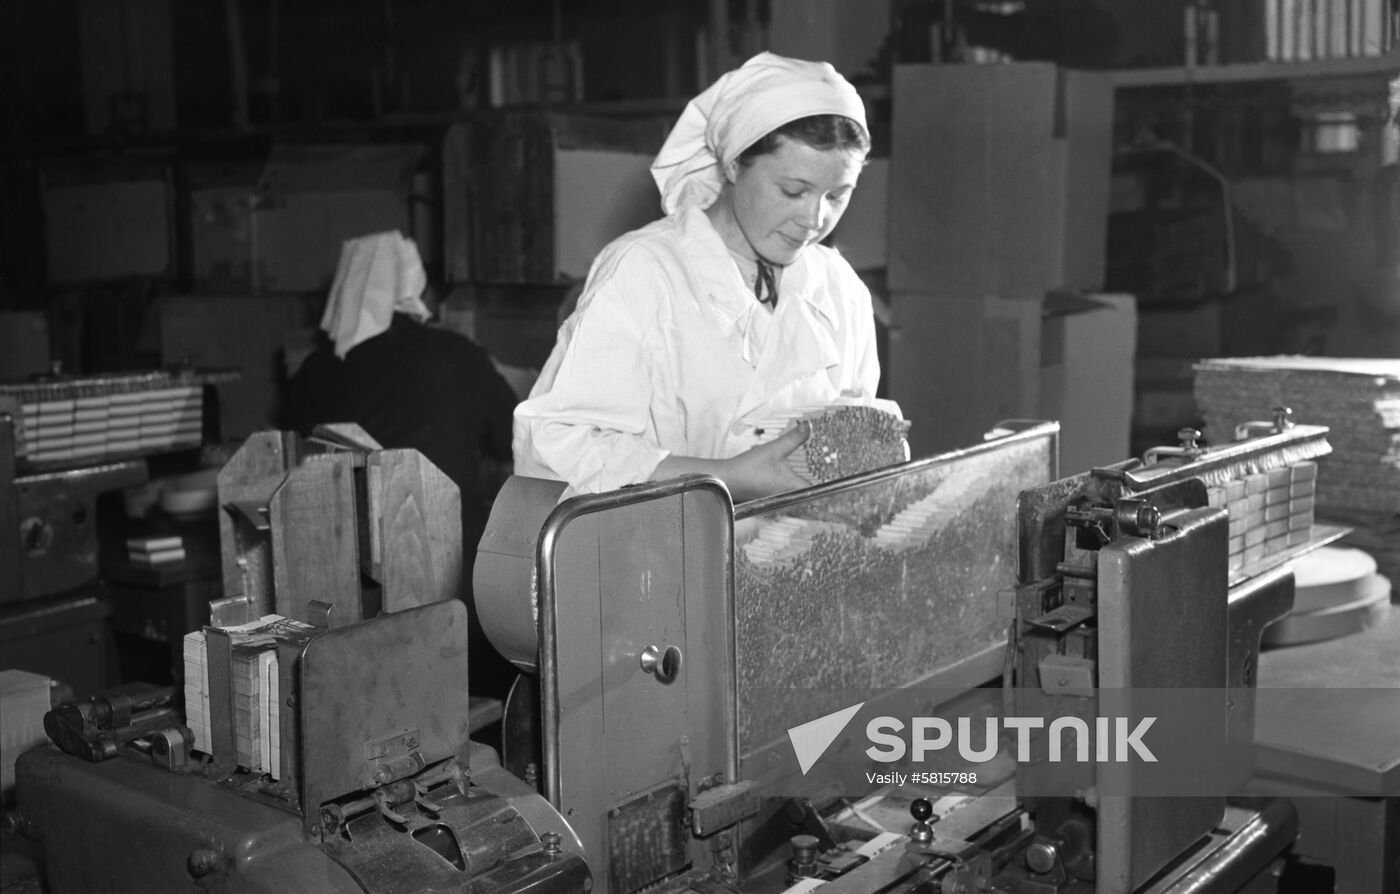 Taisia Tulova, worker of Moscow-based Dukat Tobacco Factory